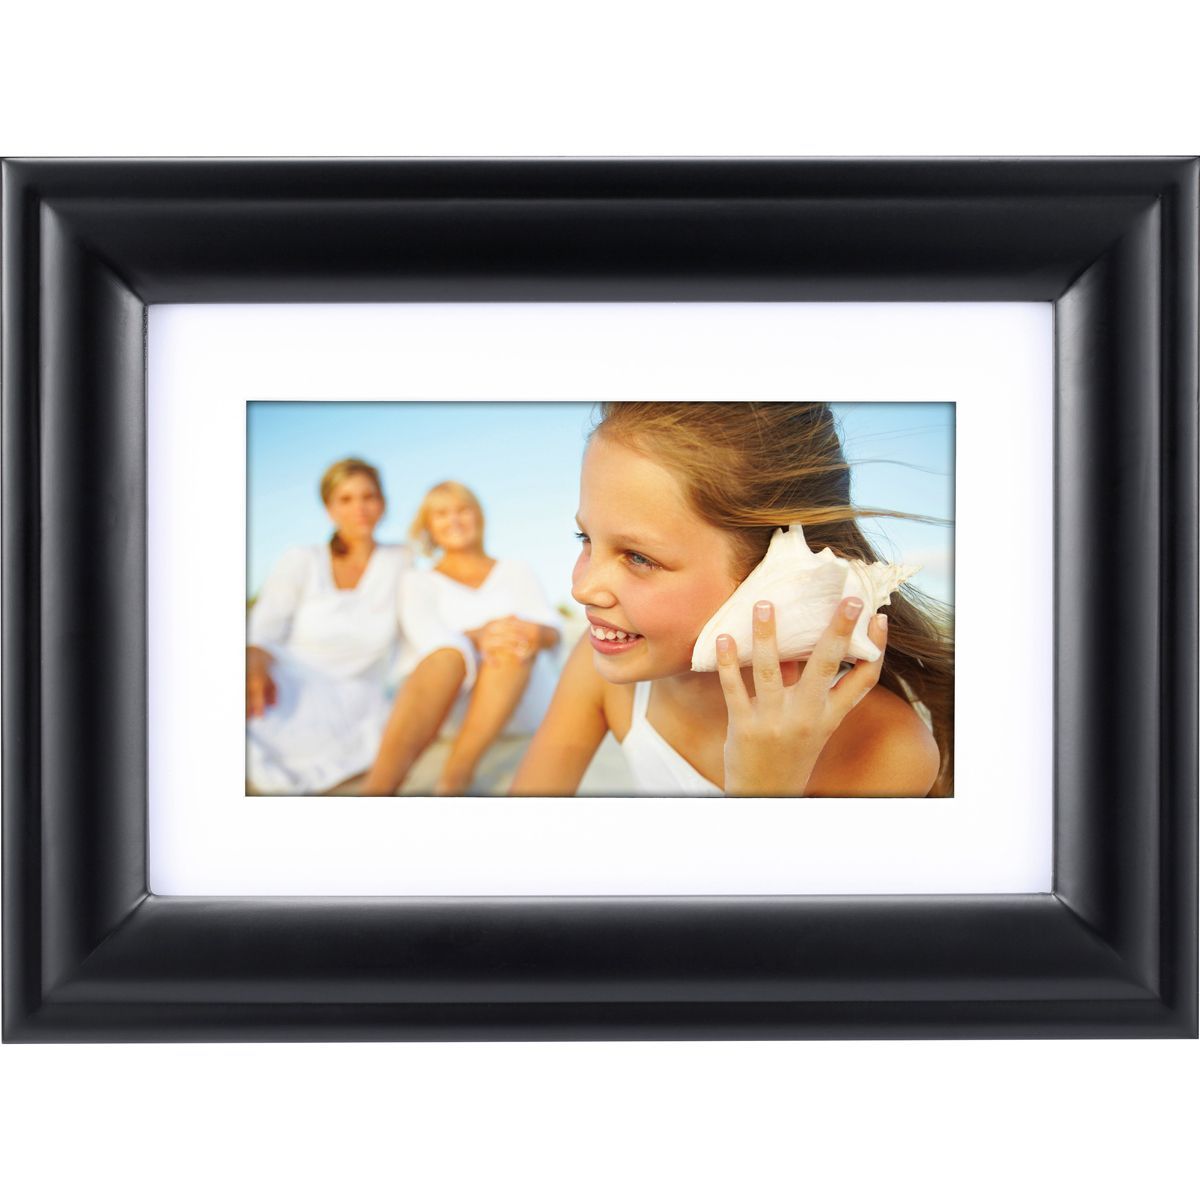 7" Digital Picture Frame with Mat Black - Polaroid | Target